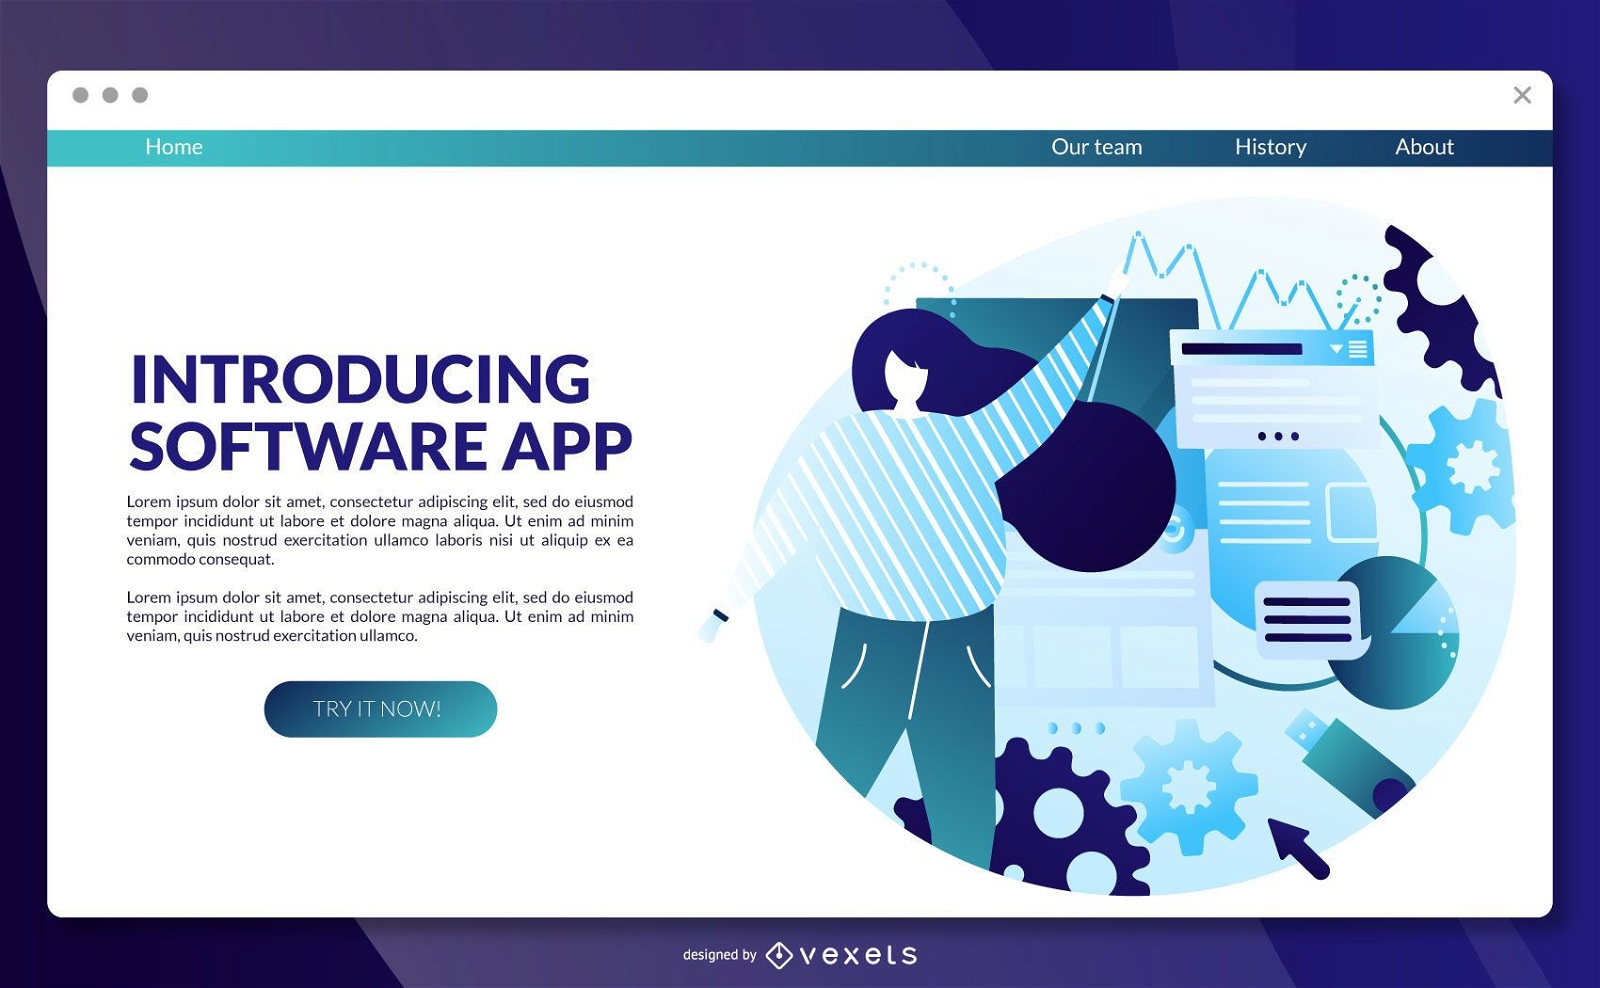 Software app landing page template